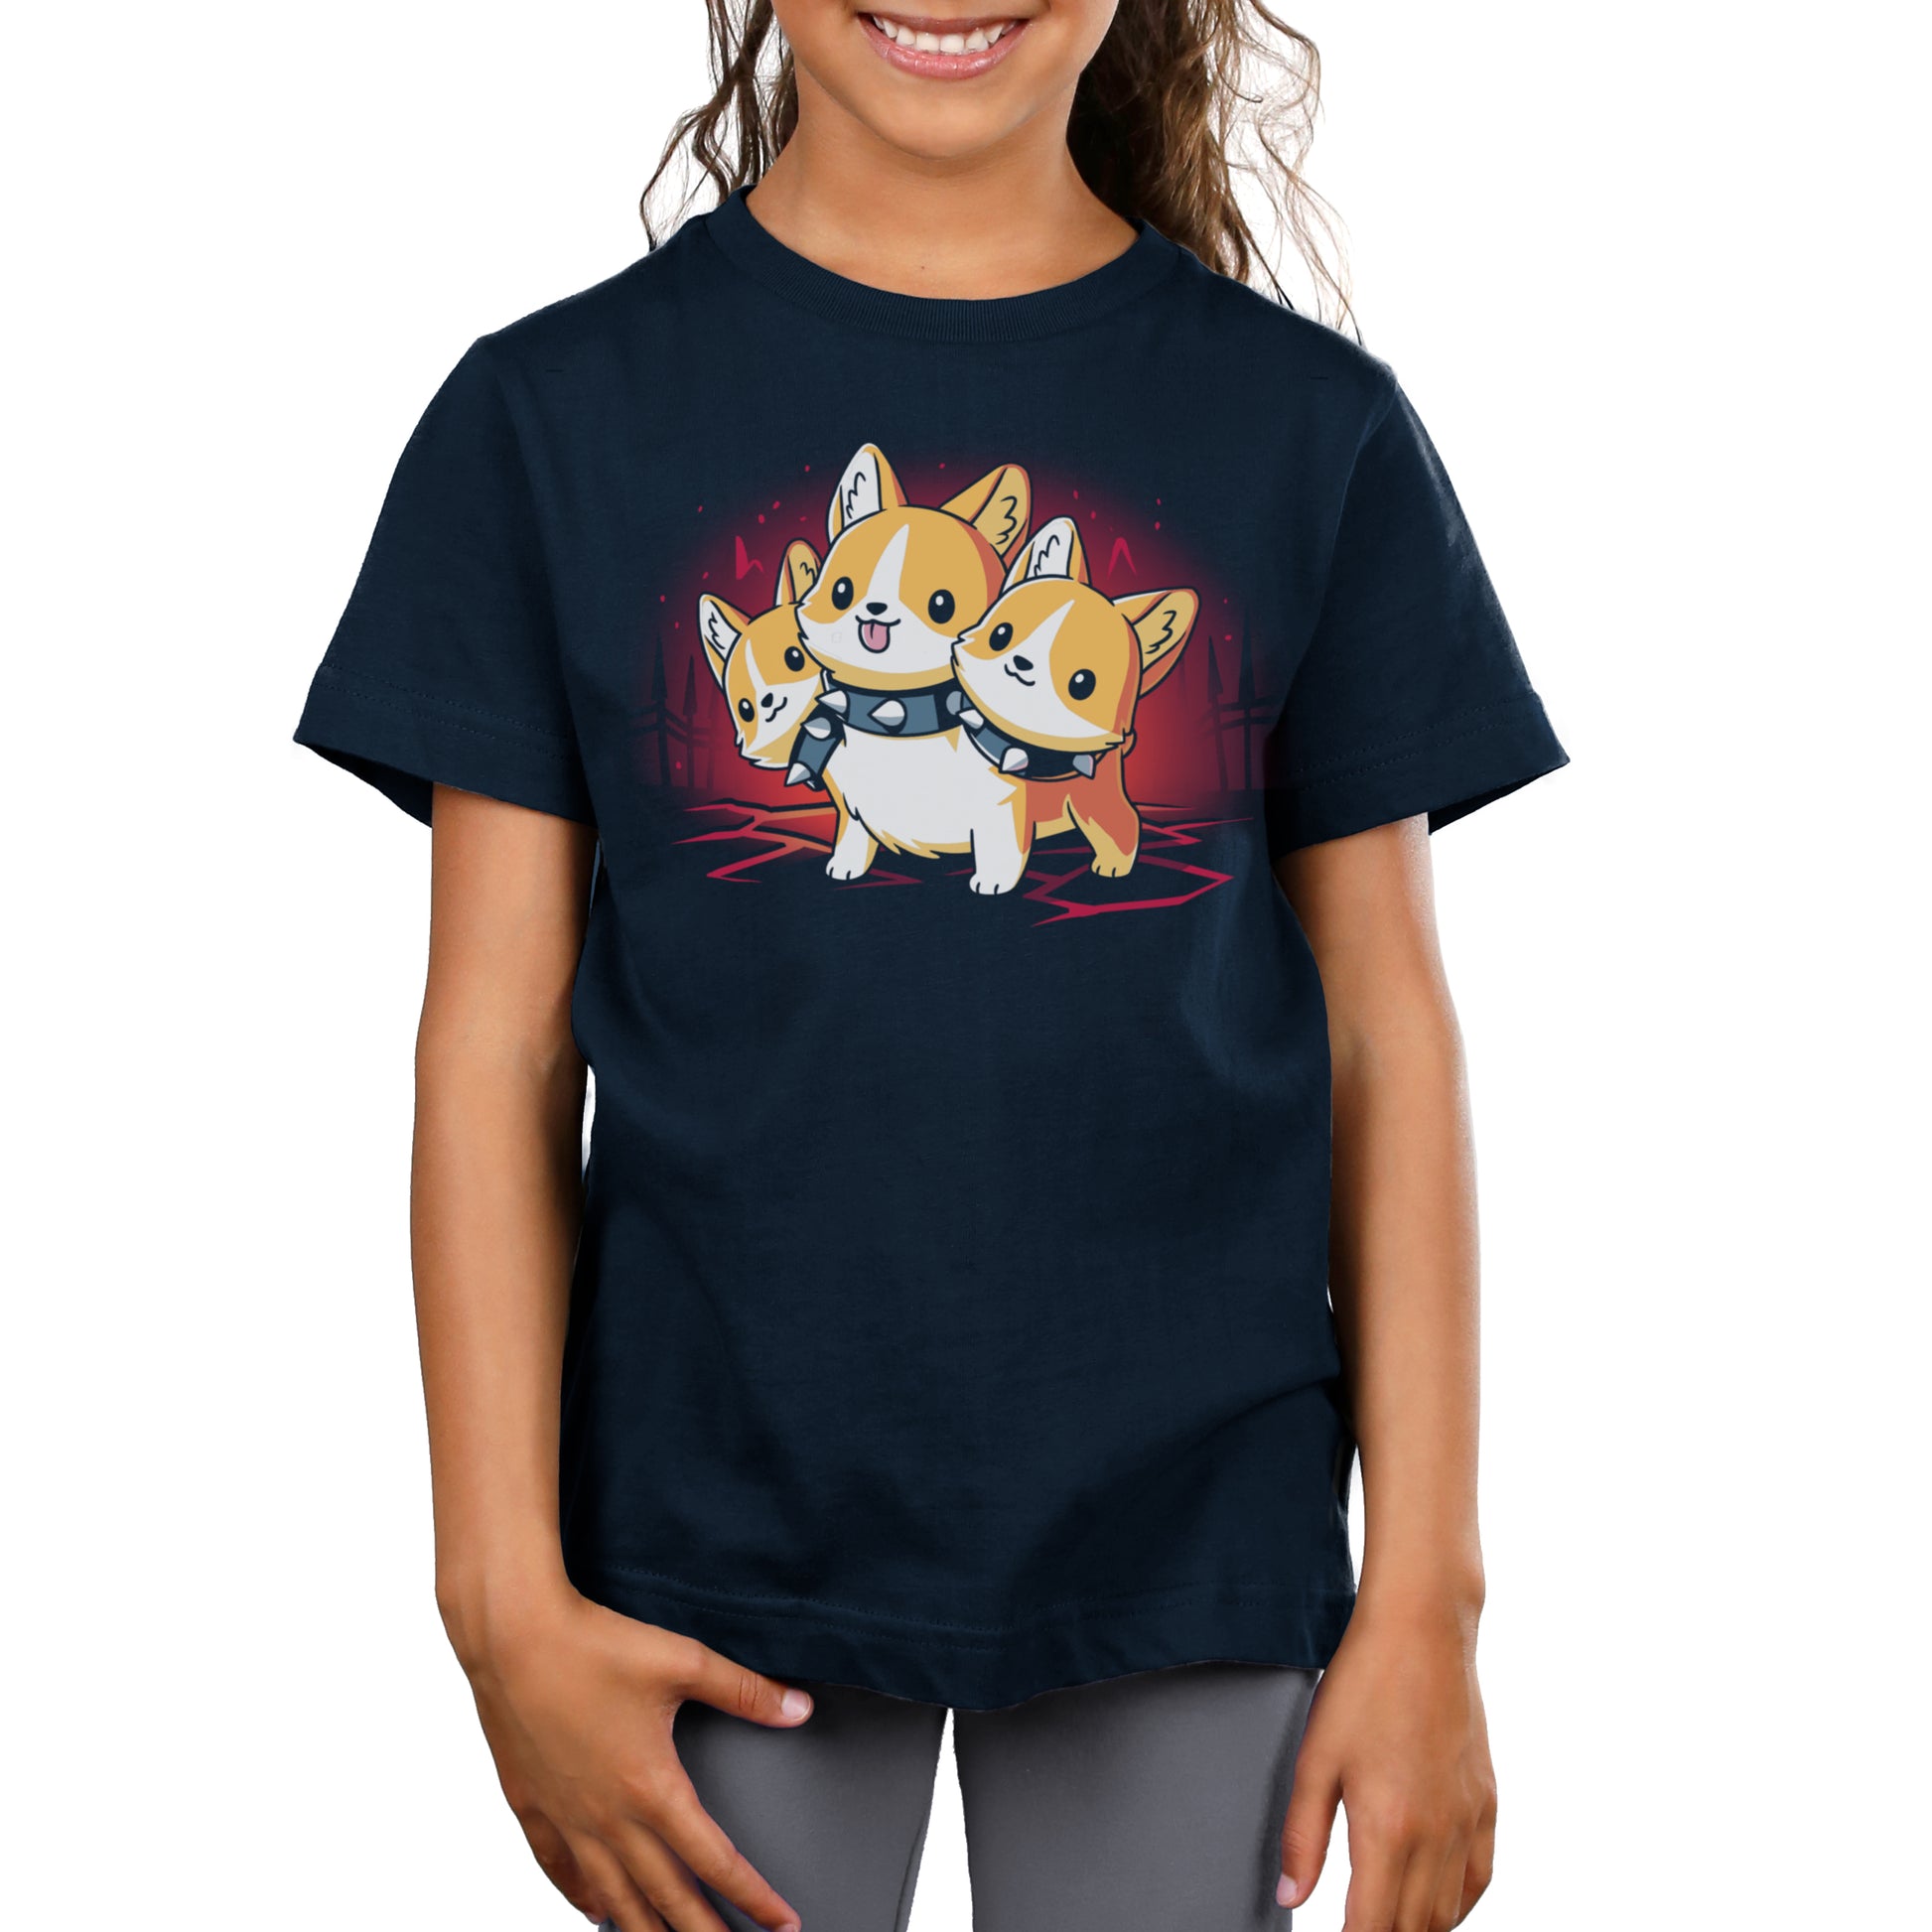 Girl wearing a navy blue t-shirt made from super soft ringspun cotton, featuring Monsterdigital's Corgi Cerberus against a red background.